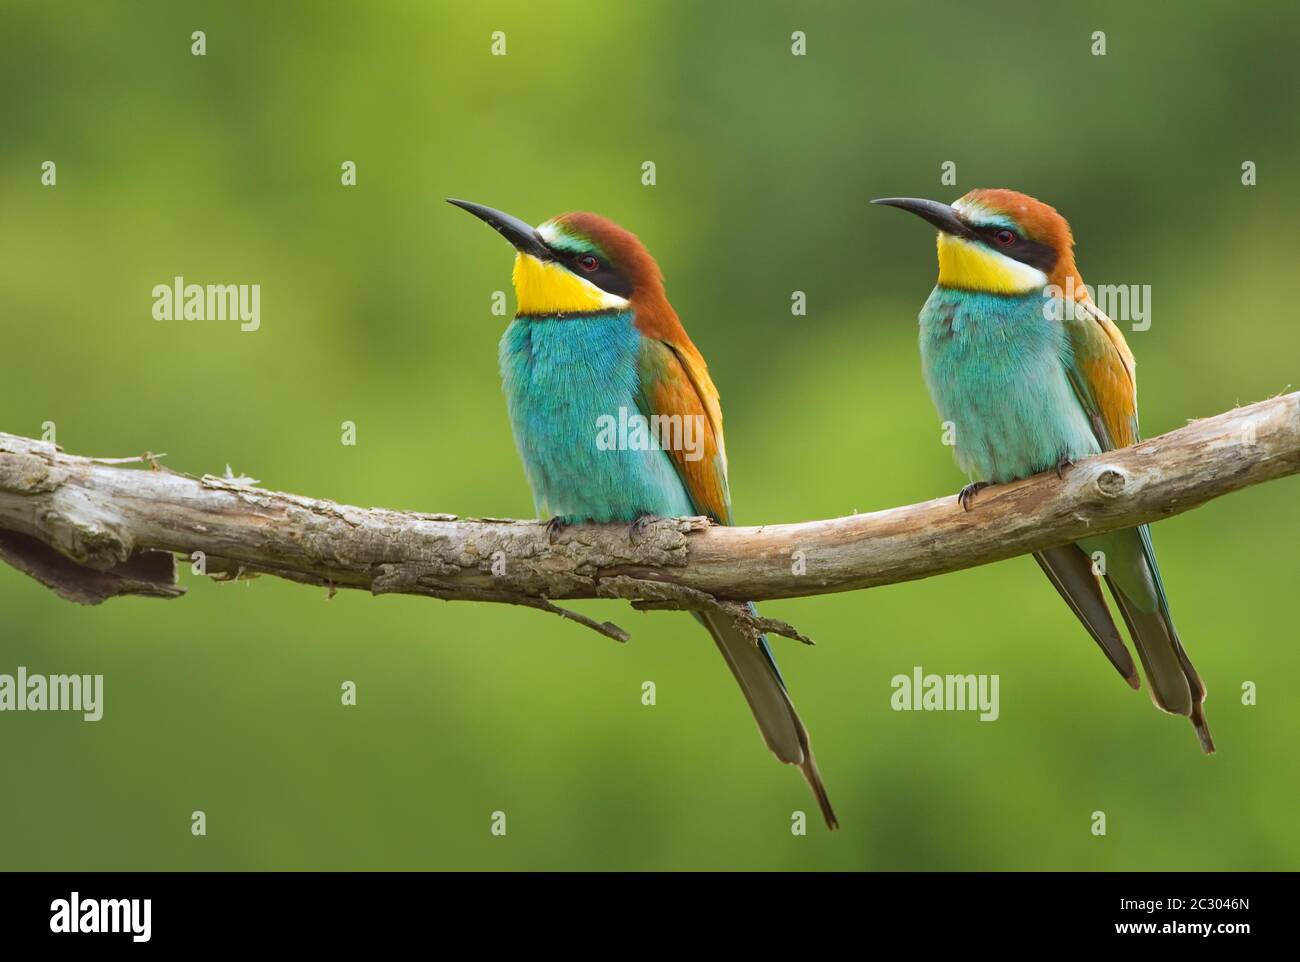 Two European bee-eaters (merops apiaster) sitting side by side on a branch, Seewinkel, Austria Stock Photo